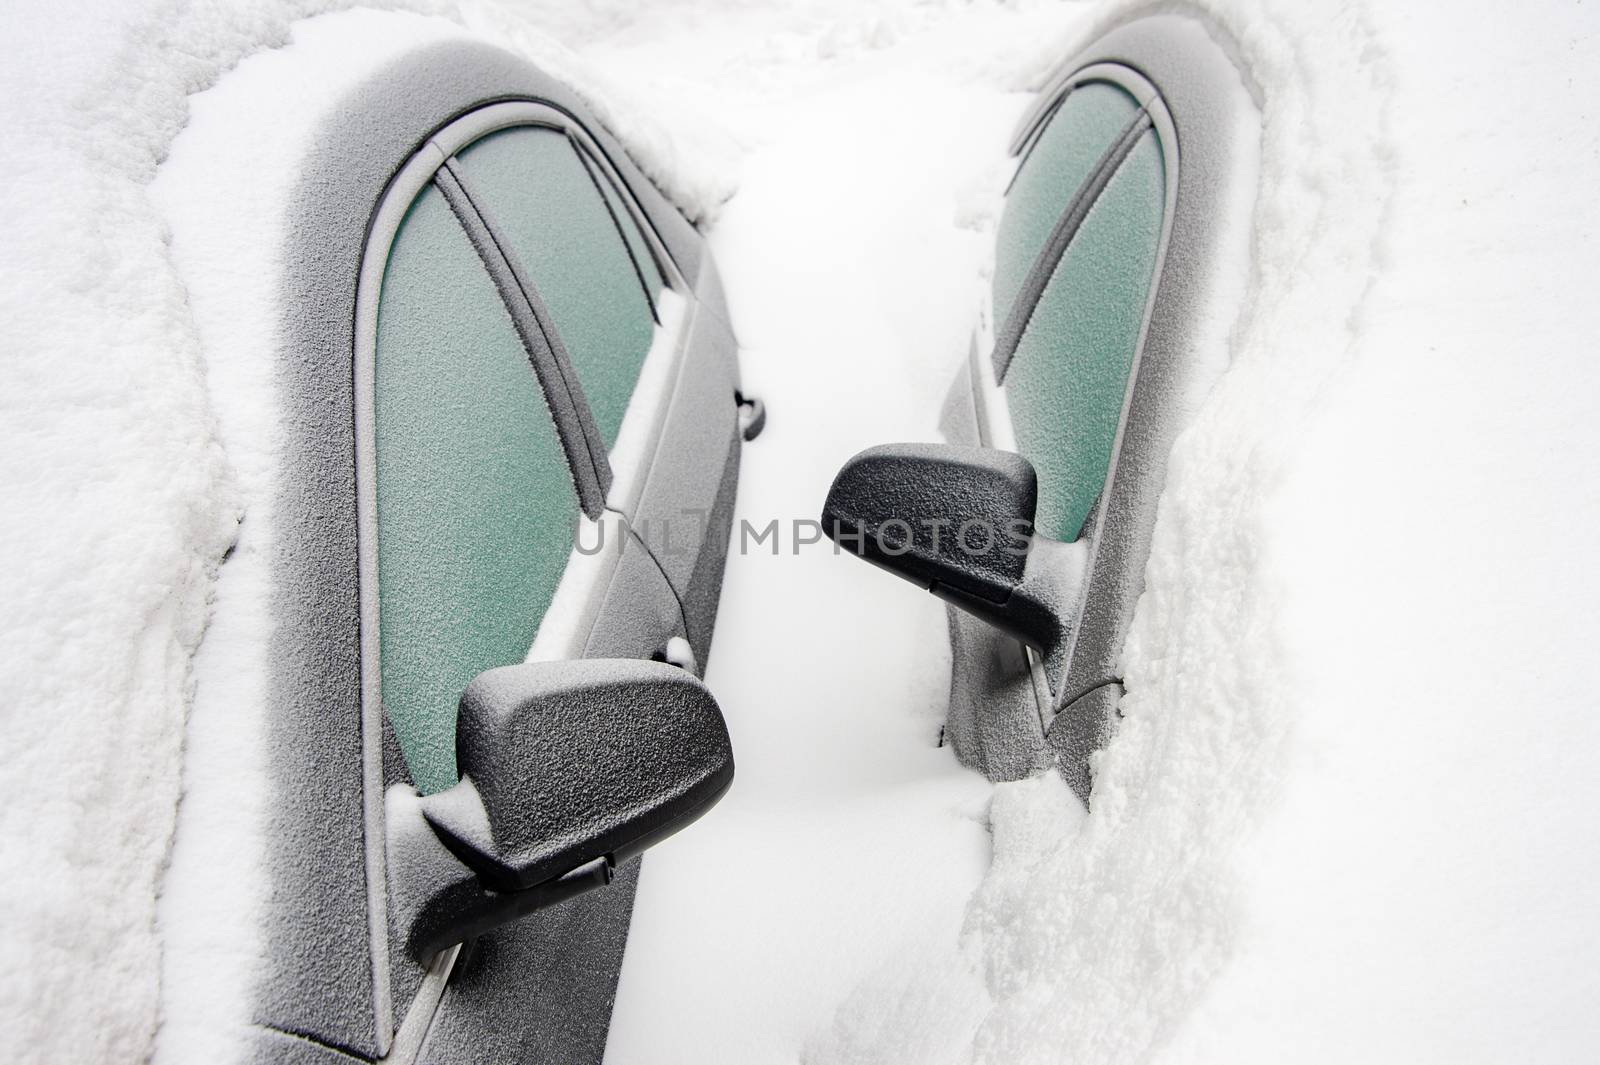 Car mirrors of two cars buried in the snow after snowstorm (Mont by mbruxelle